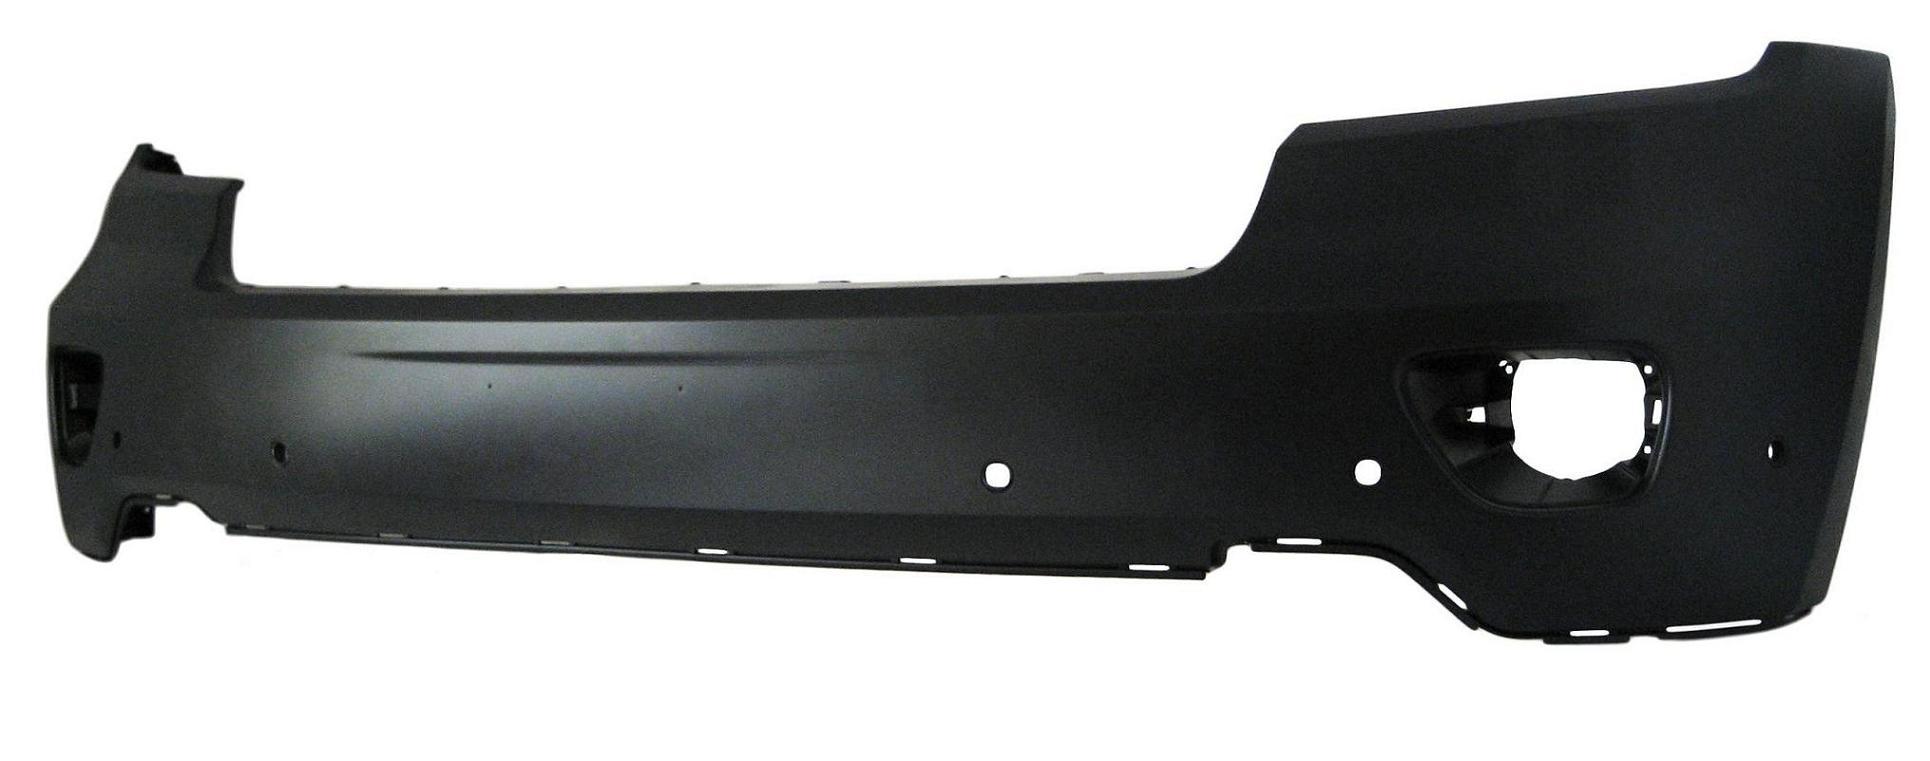 Aftermarket BUMPER COVERS for JEEP - GRAND CHEROKEE, GRAND CHEROKEE,14-15,Front bumper cover upper